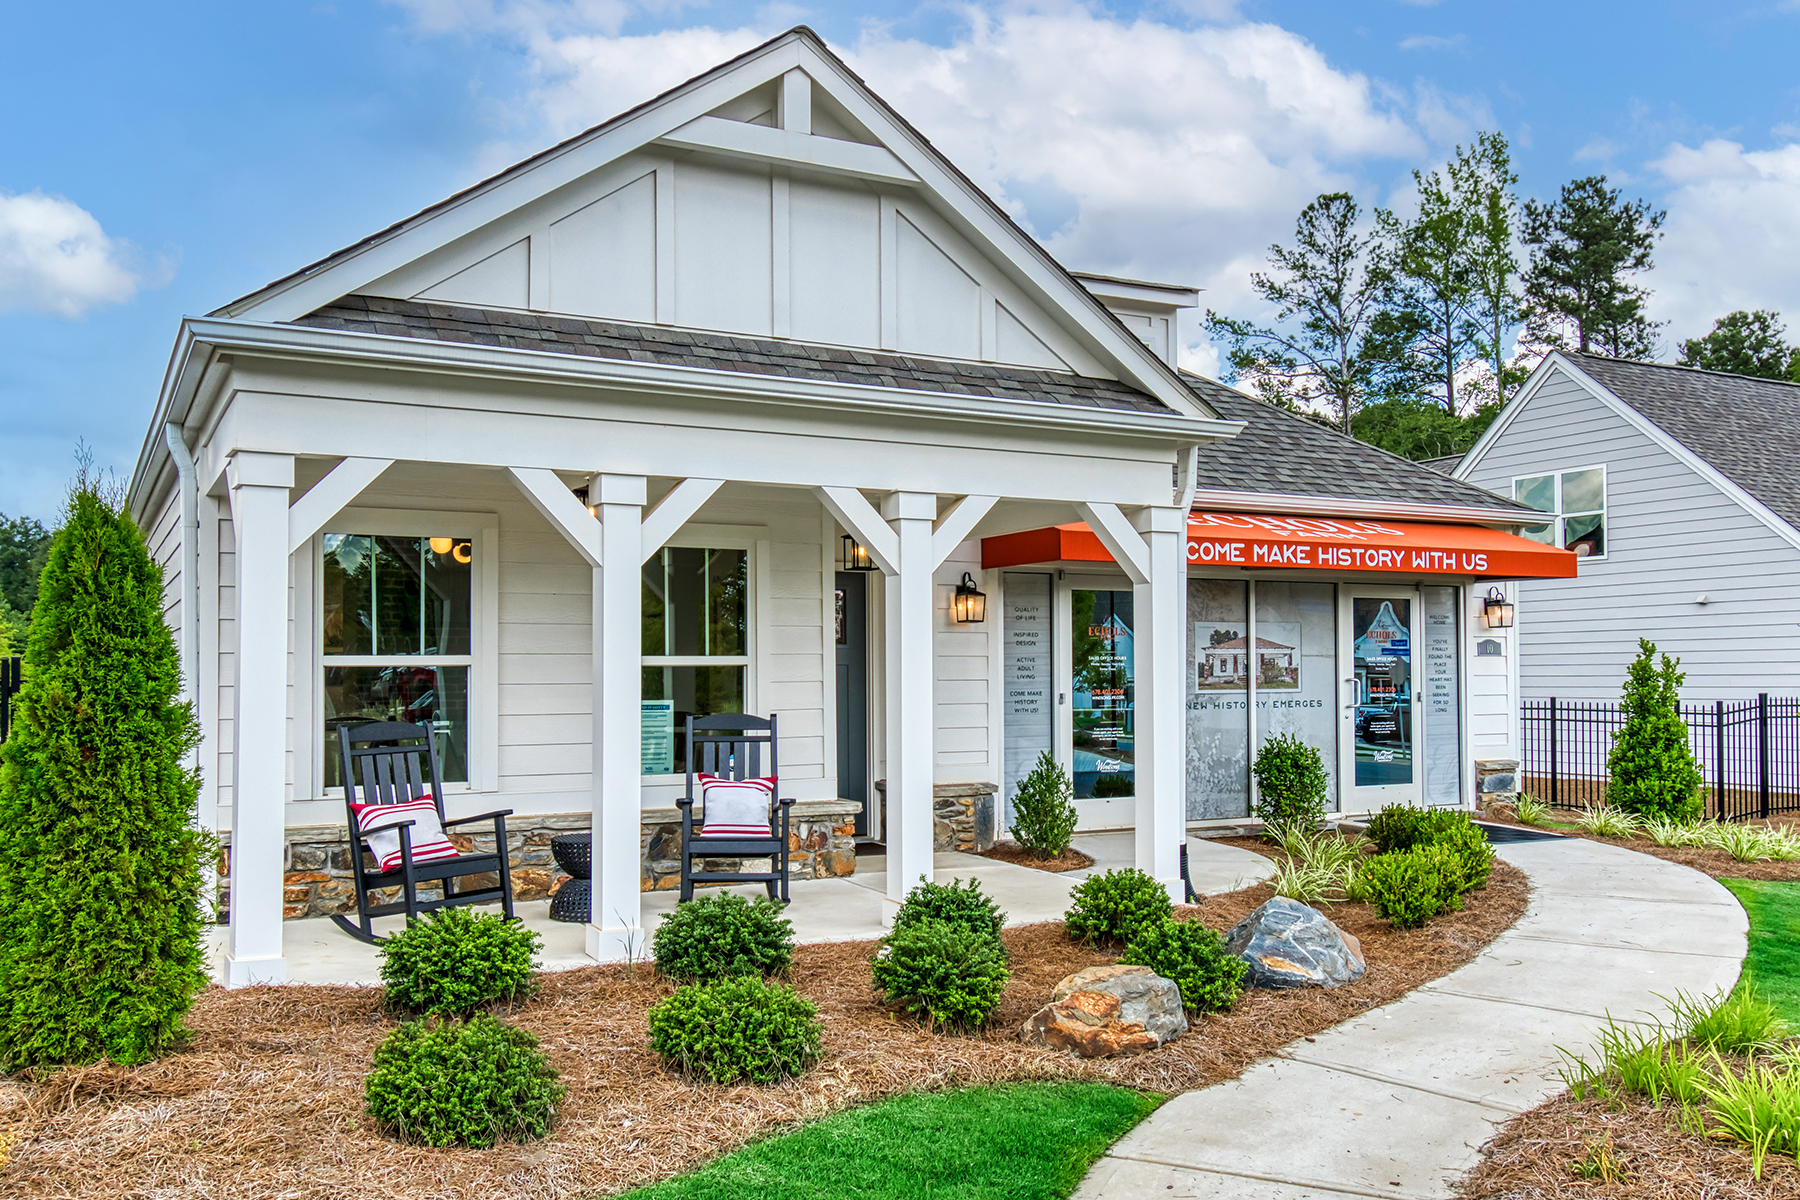 Echols Farm Welcome Center tells the story of the past and present of the historic property thriving as an active senior community north of Atlanta.